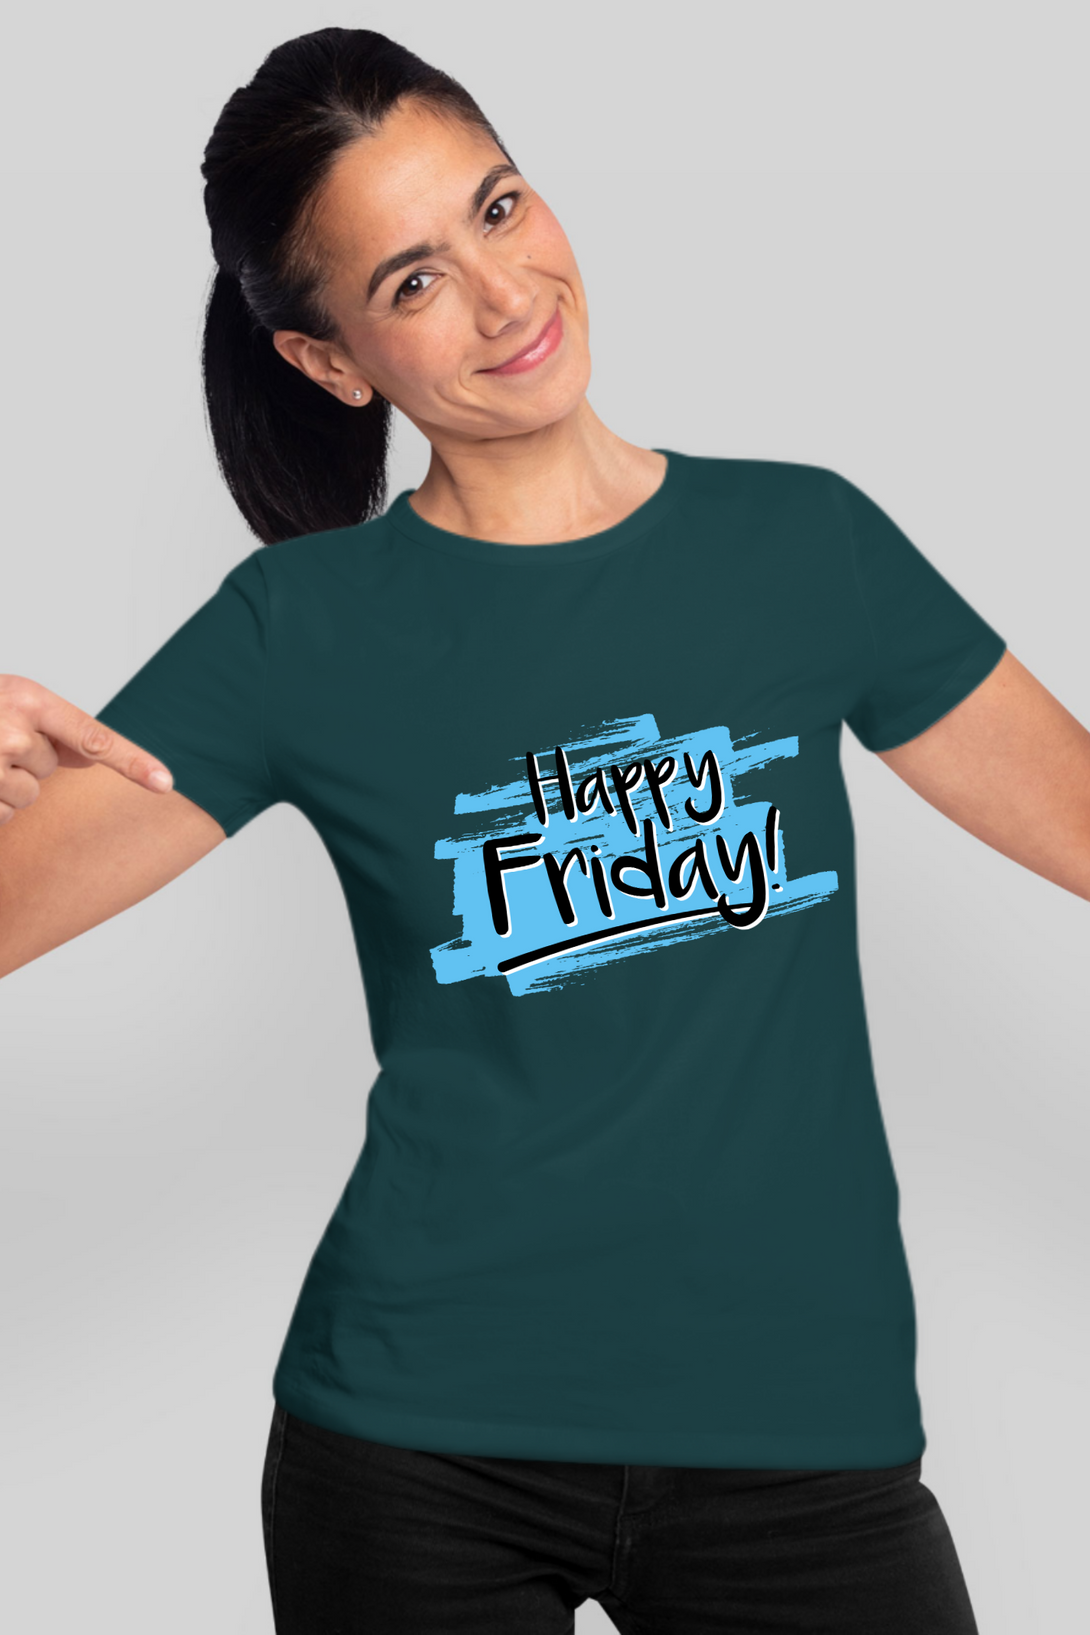 Happy Friday Printed T-Shirt For Women - WowWaves - 10